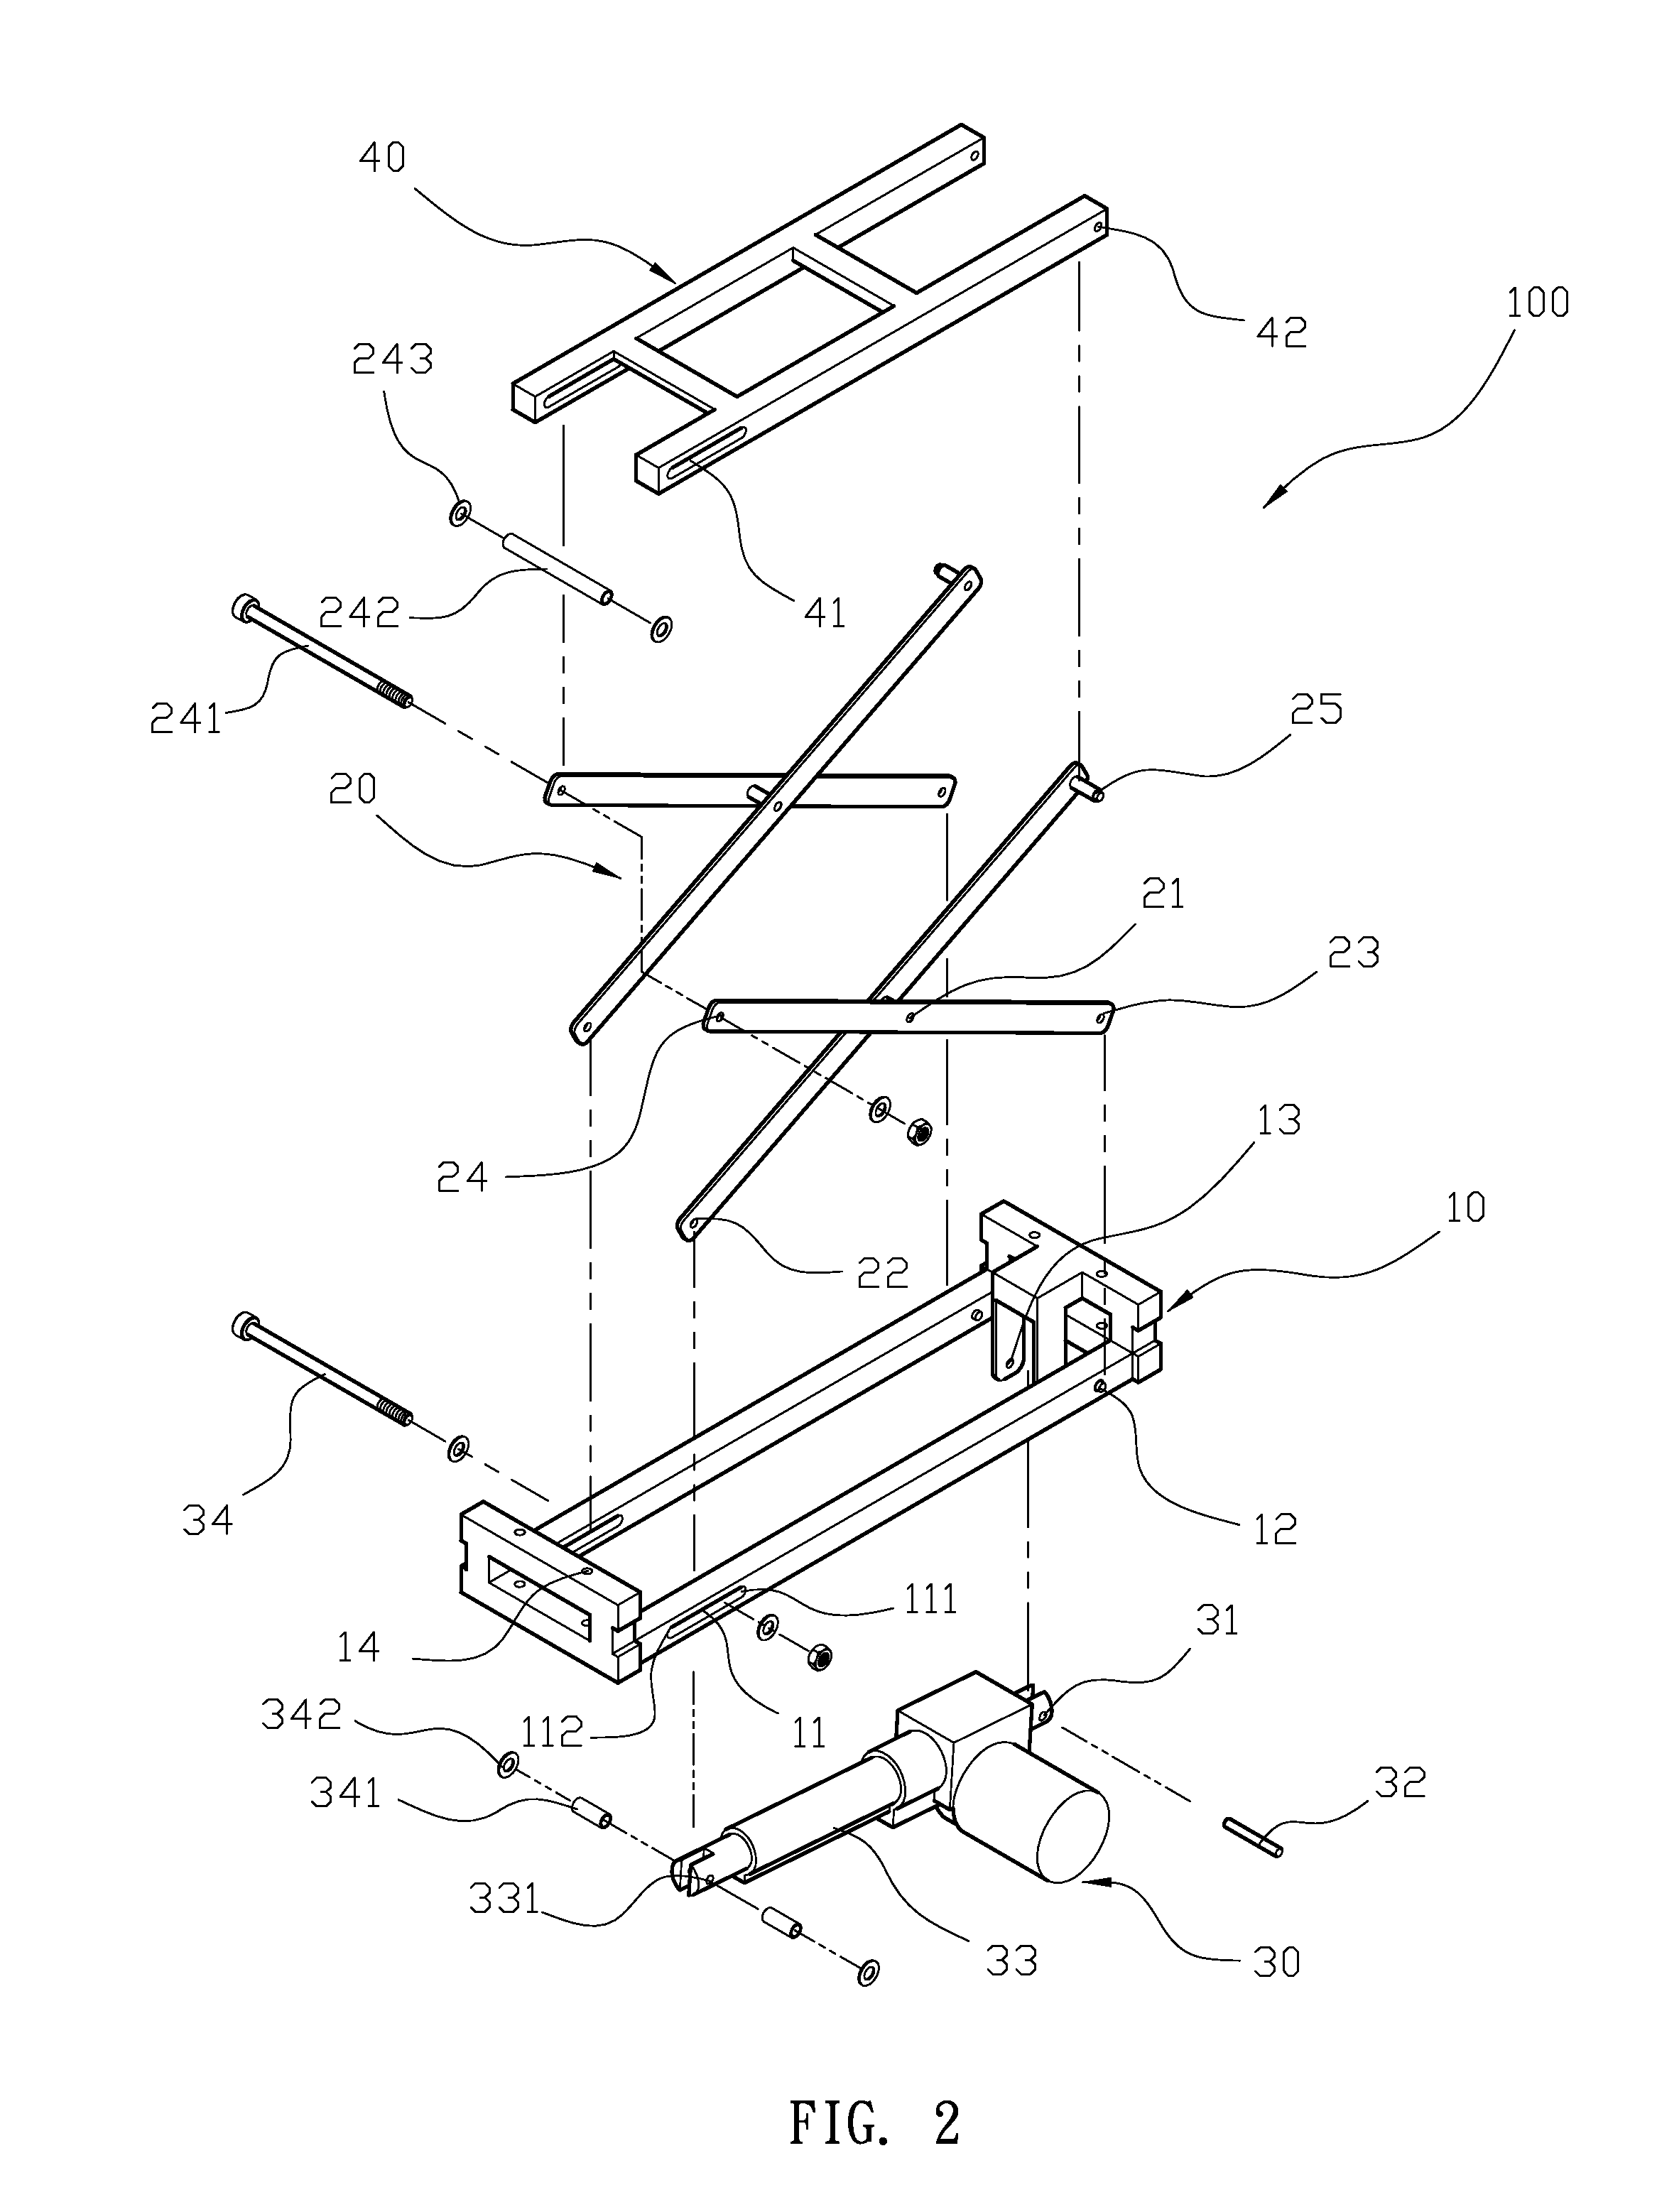 Lower-back supporting structure for a bed or a chair